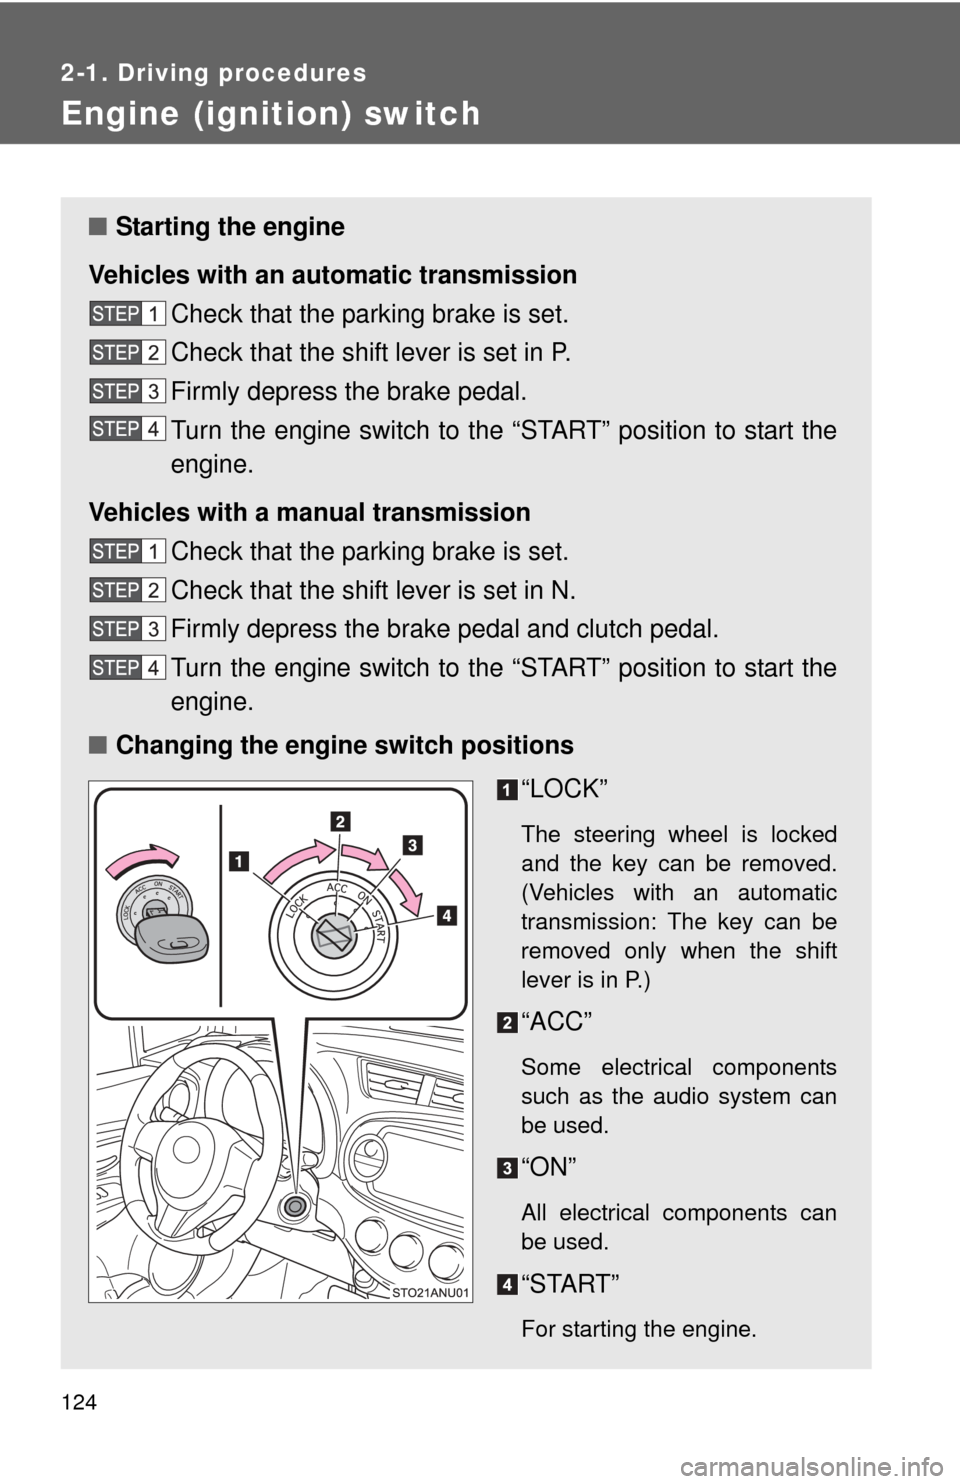 TOYOTA YARIS 2014 3.G Owners Manual 124
2-1. Driving procedures
Engine (ignition) switch 
■Starting the engine
Vehicles with an au tomatic transmission
Check that the parking brake is set.
Check that the shift lever is set in P.
Firml